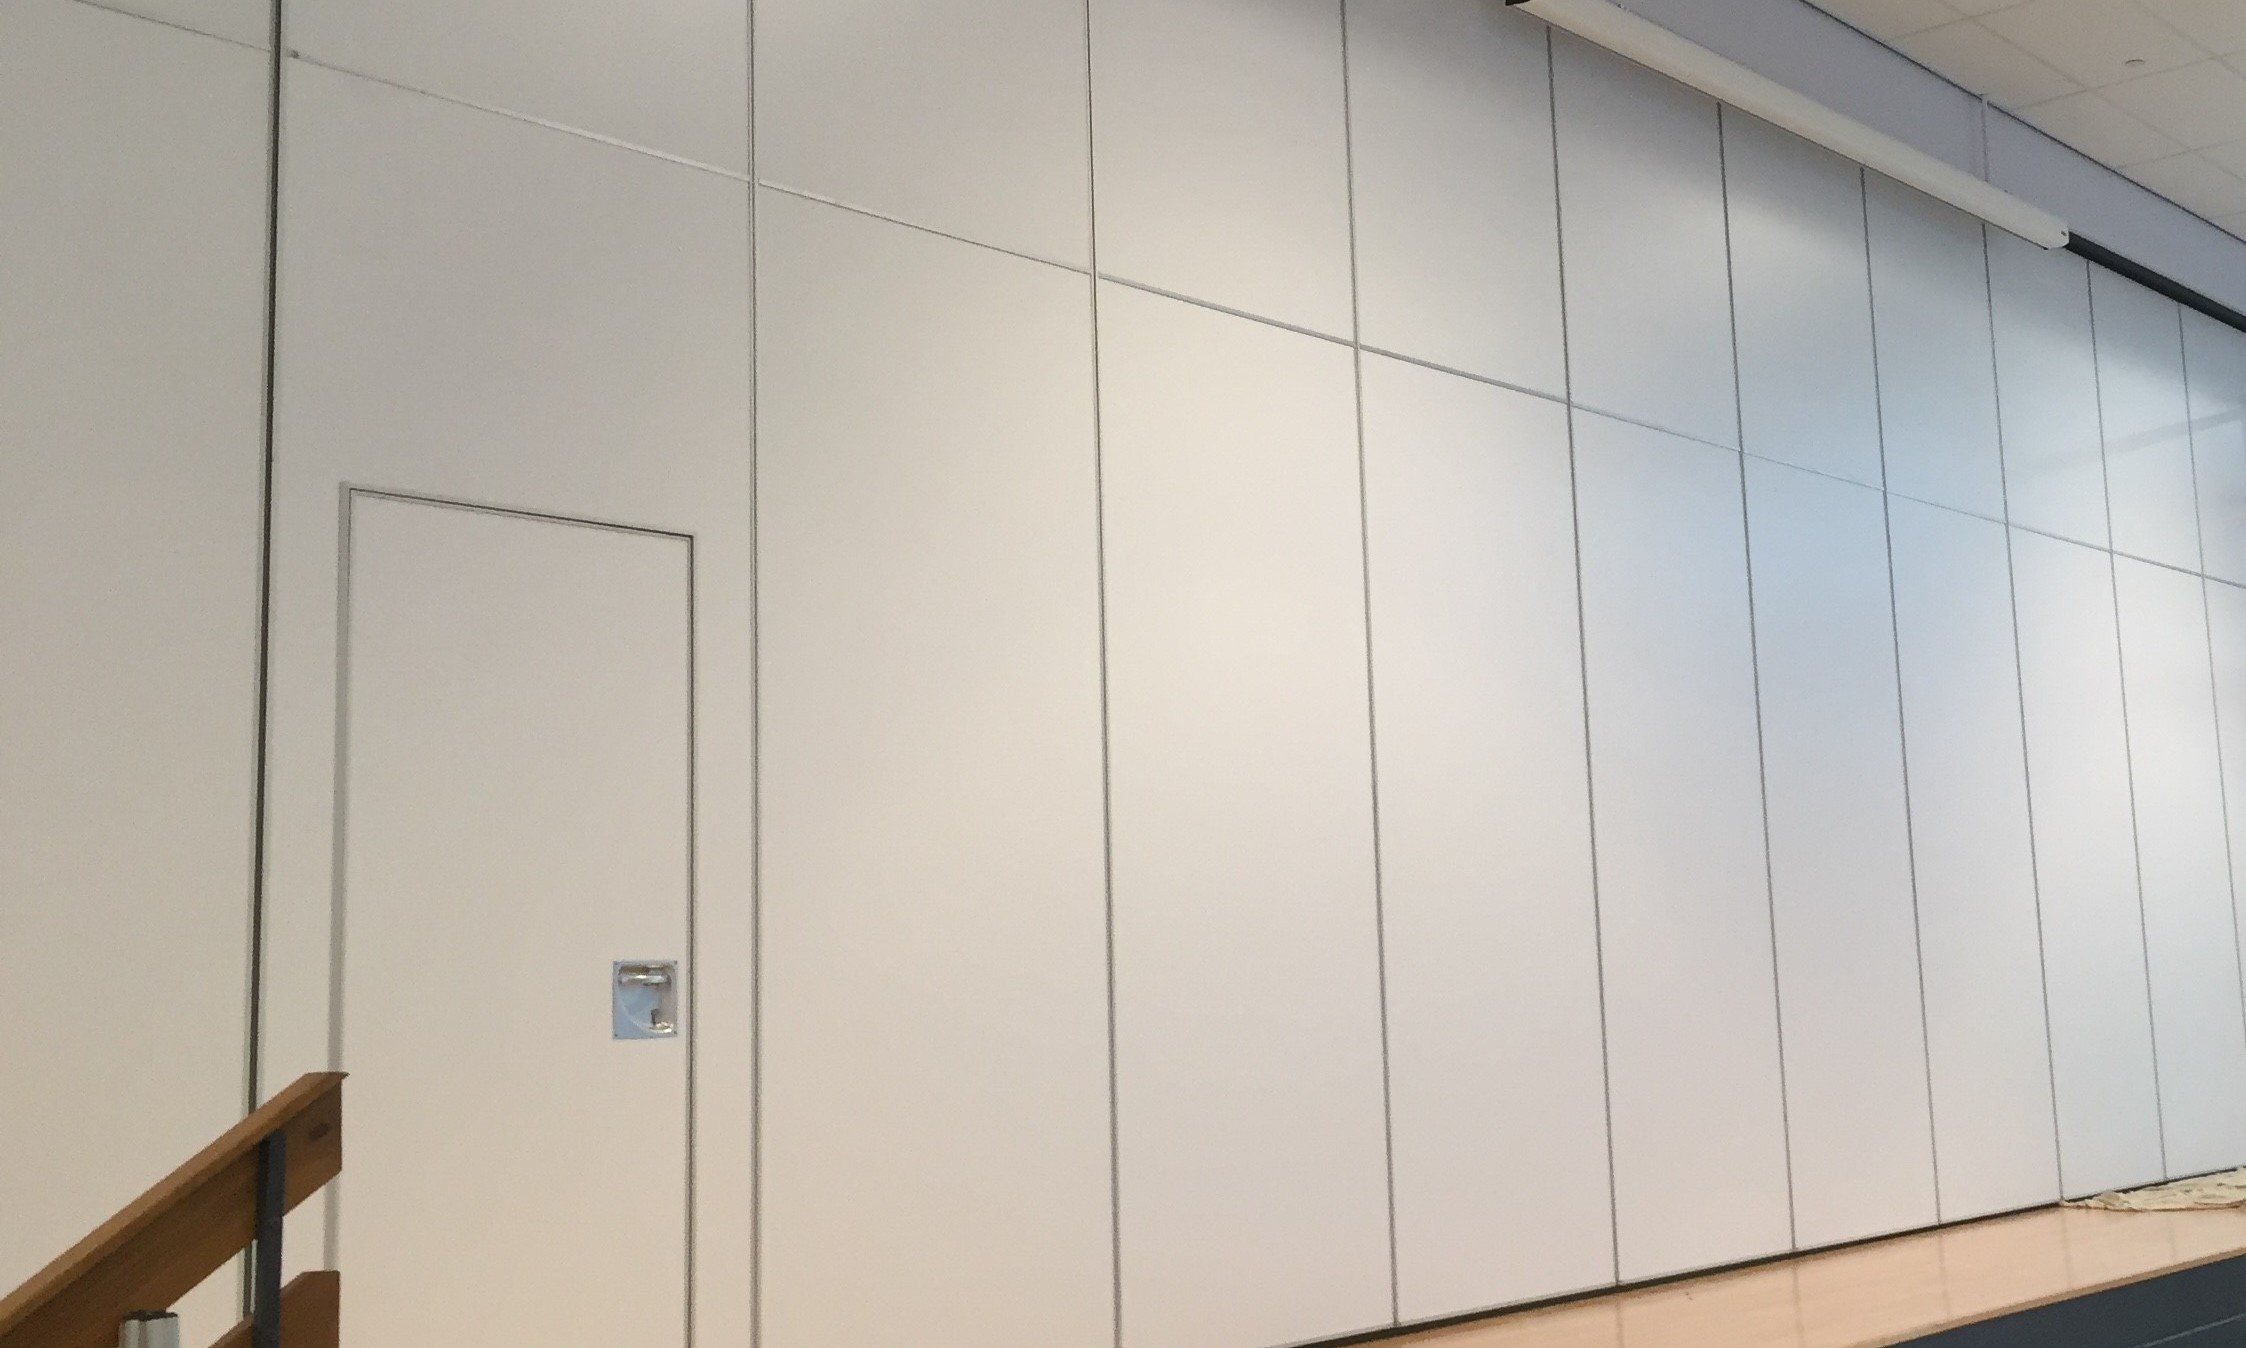 Servicing moveable walls in schools